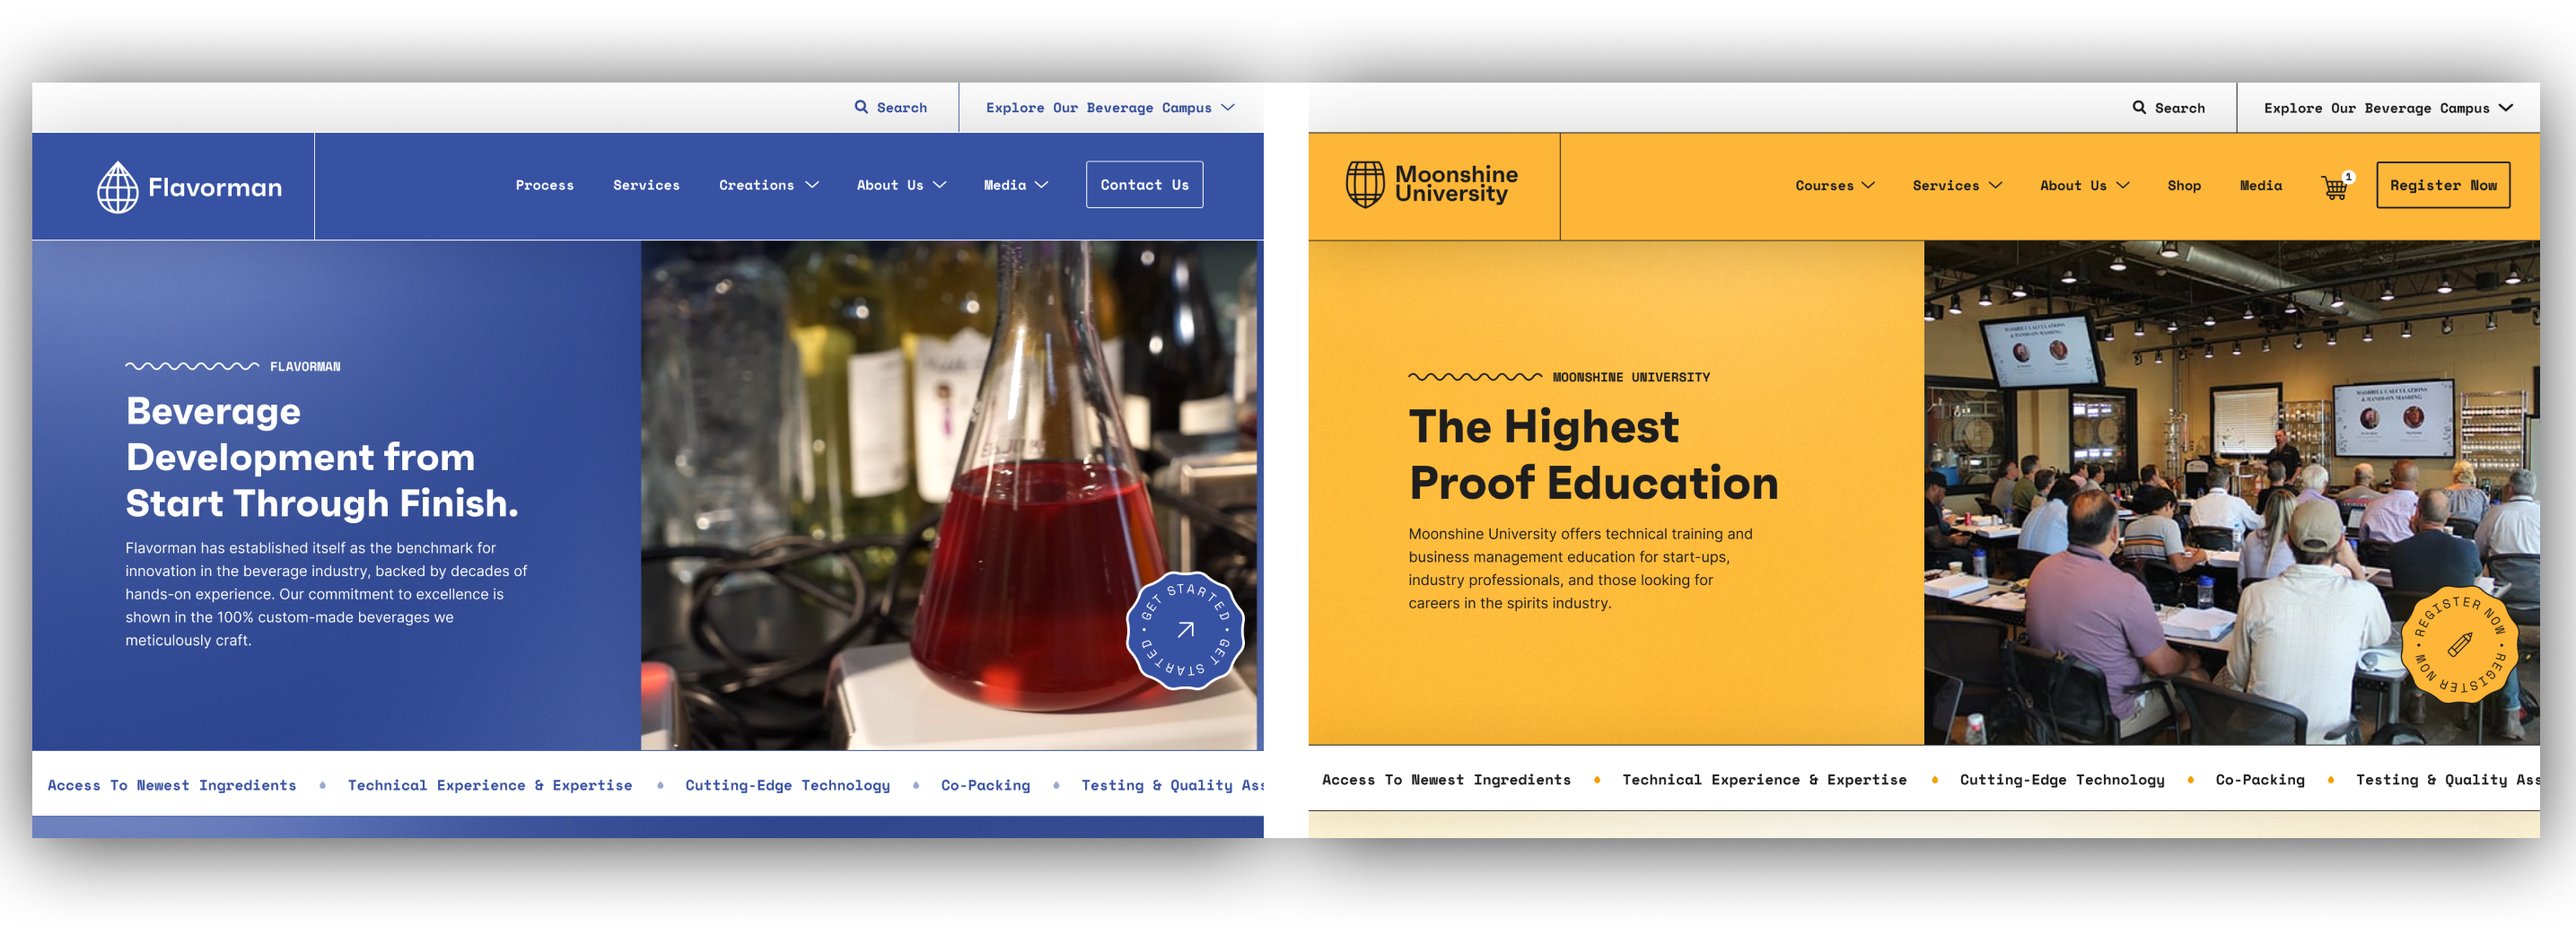 Flavorman and Moonshine University sites side by side
